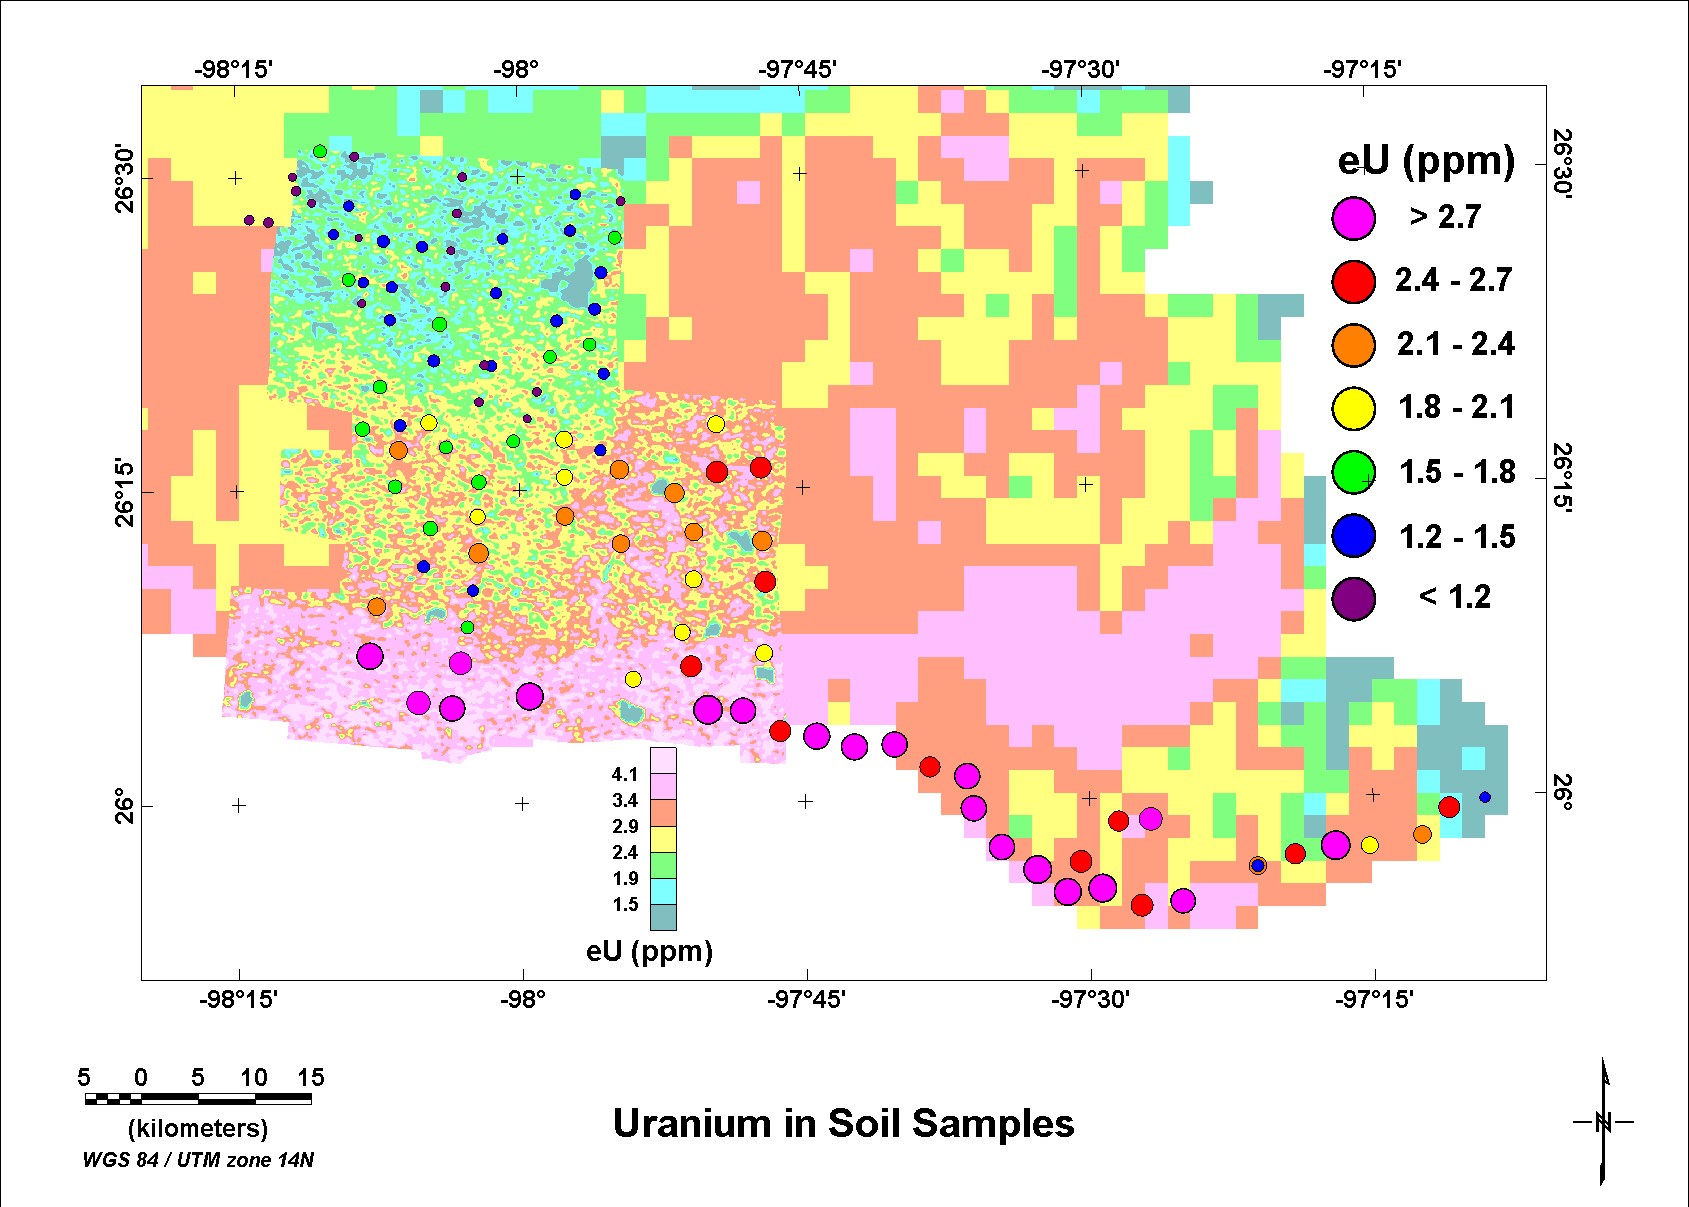 Image showing samples and uranium concentrations